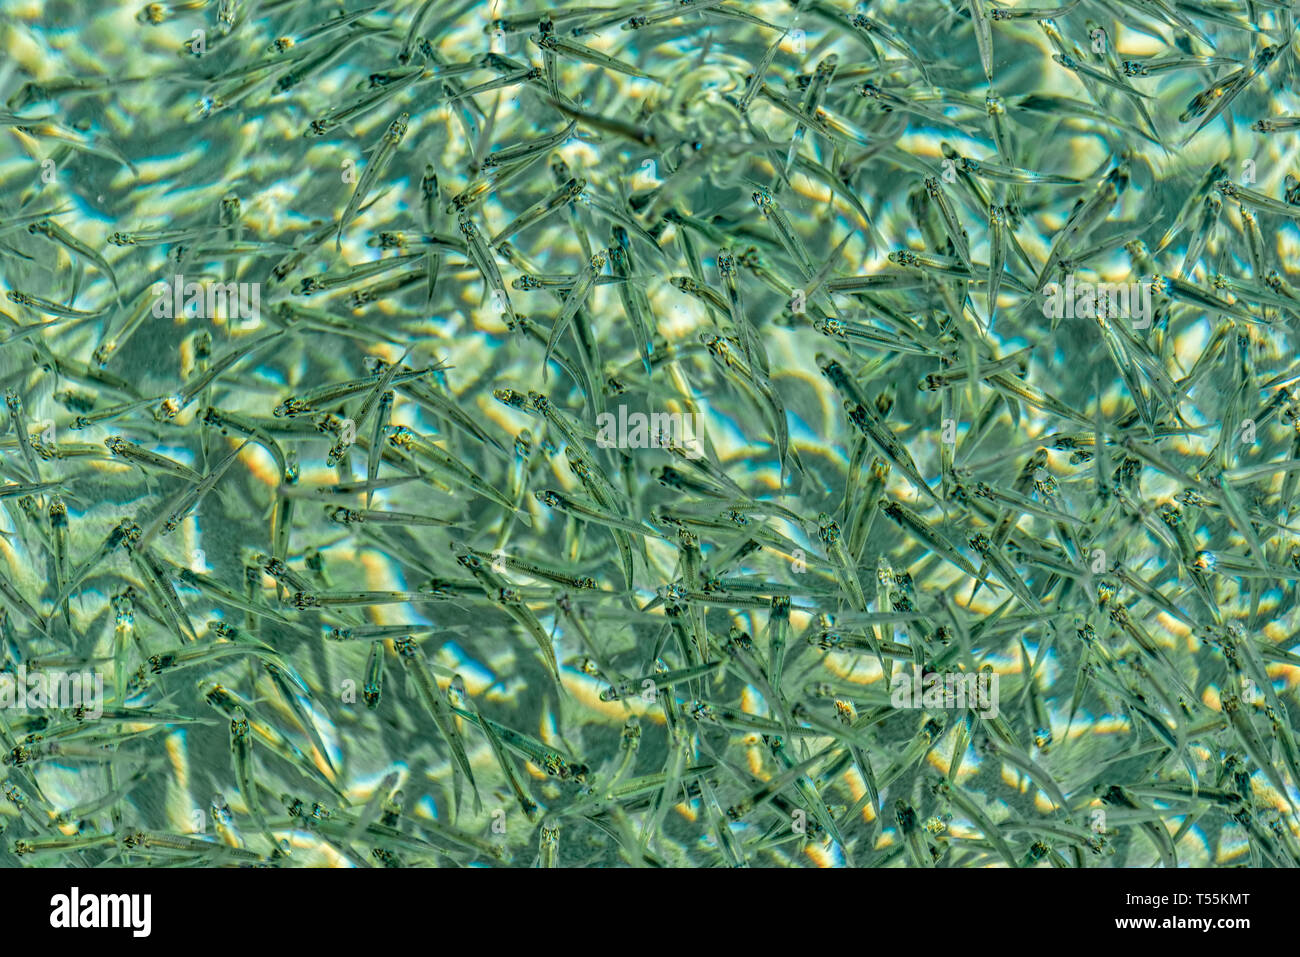 School of small fish in crystal clear, greenish and shallow sea with sandy bottom Stock Photo